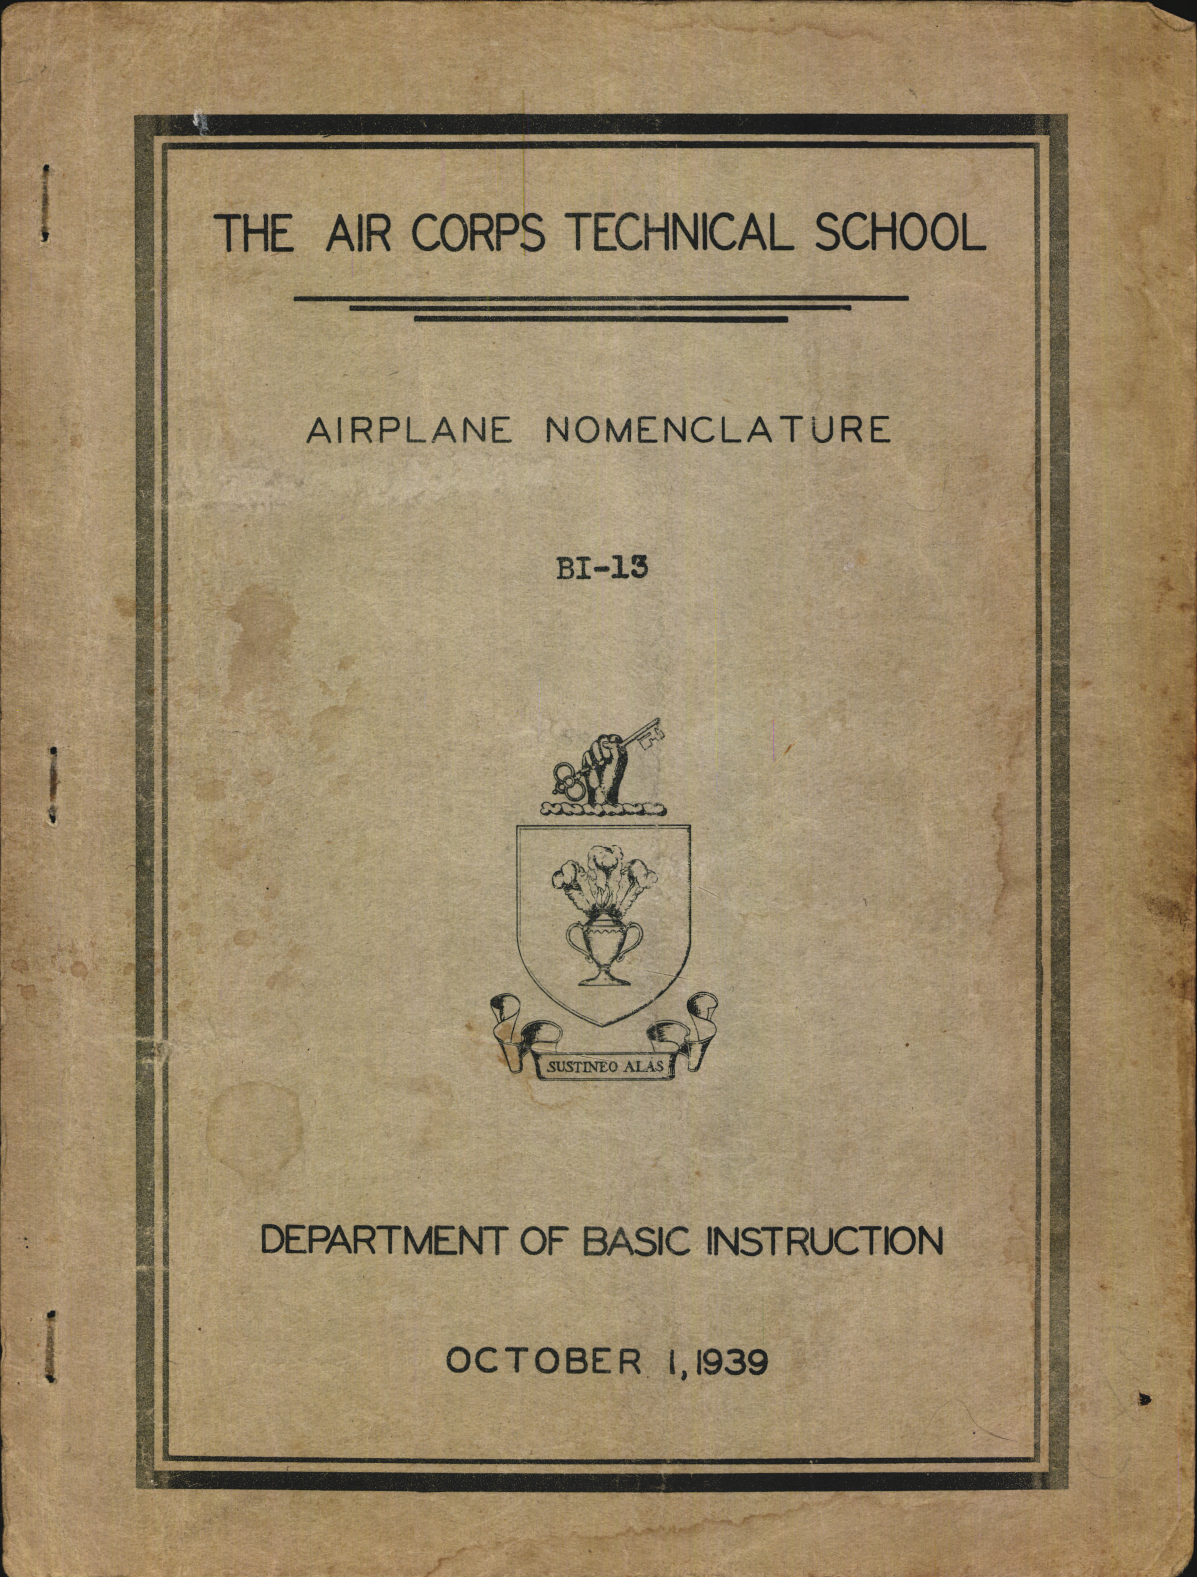 Sample page 1 from AirCorps Library document: The Air Corps Technical School; Nomenclature for Aeronautics 